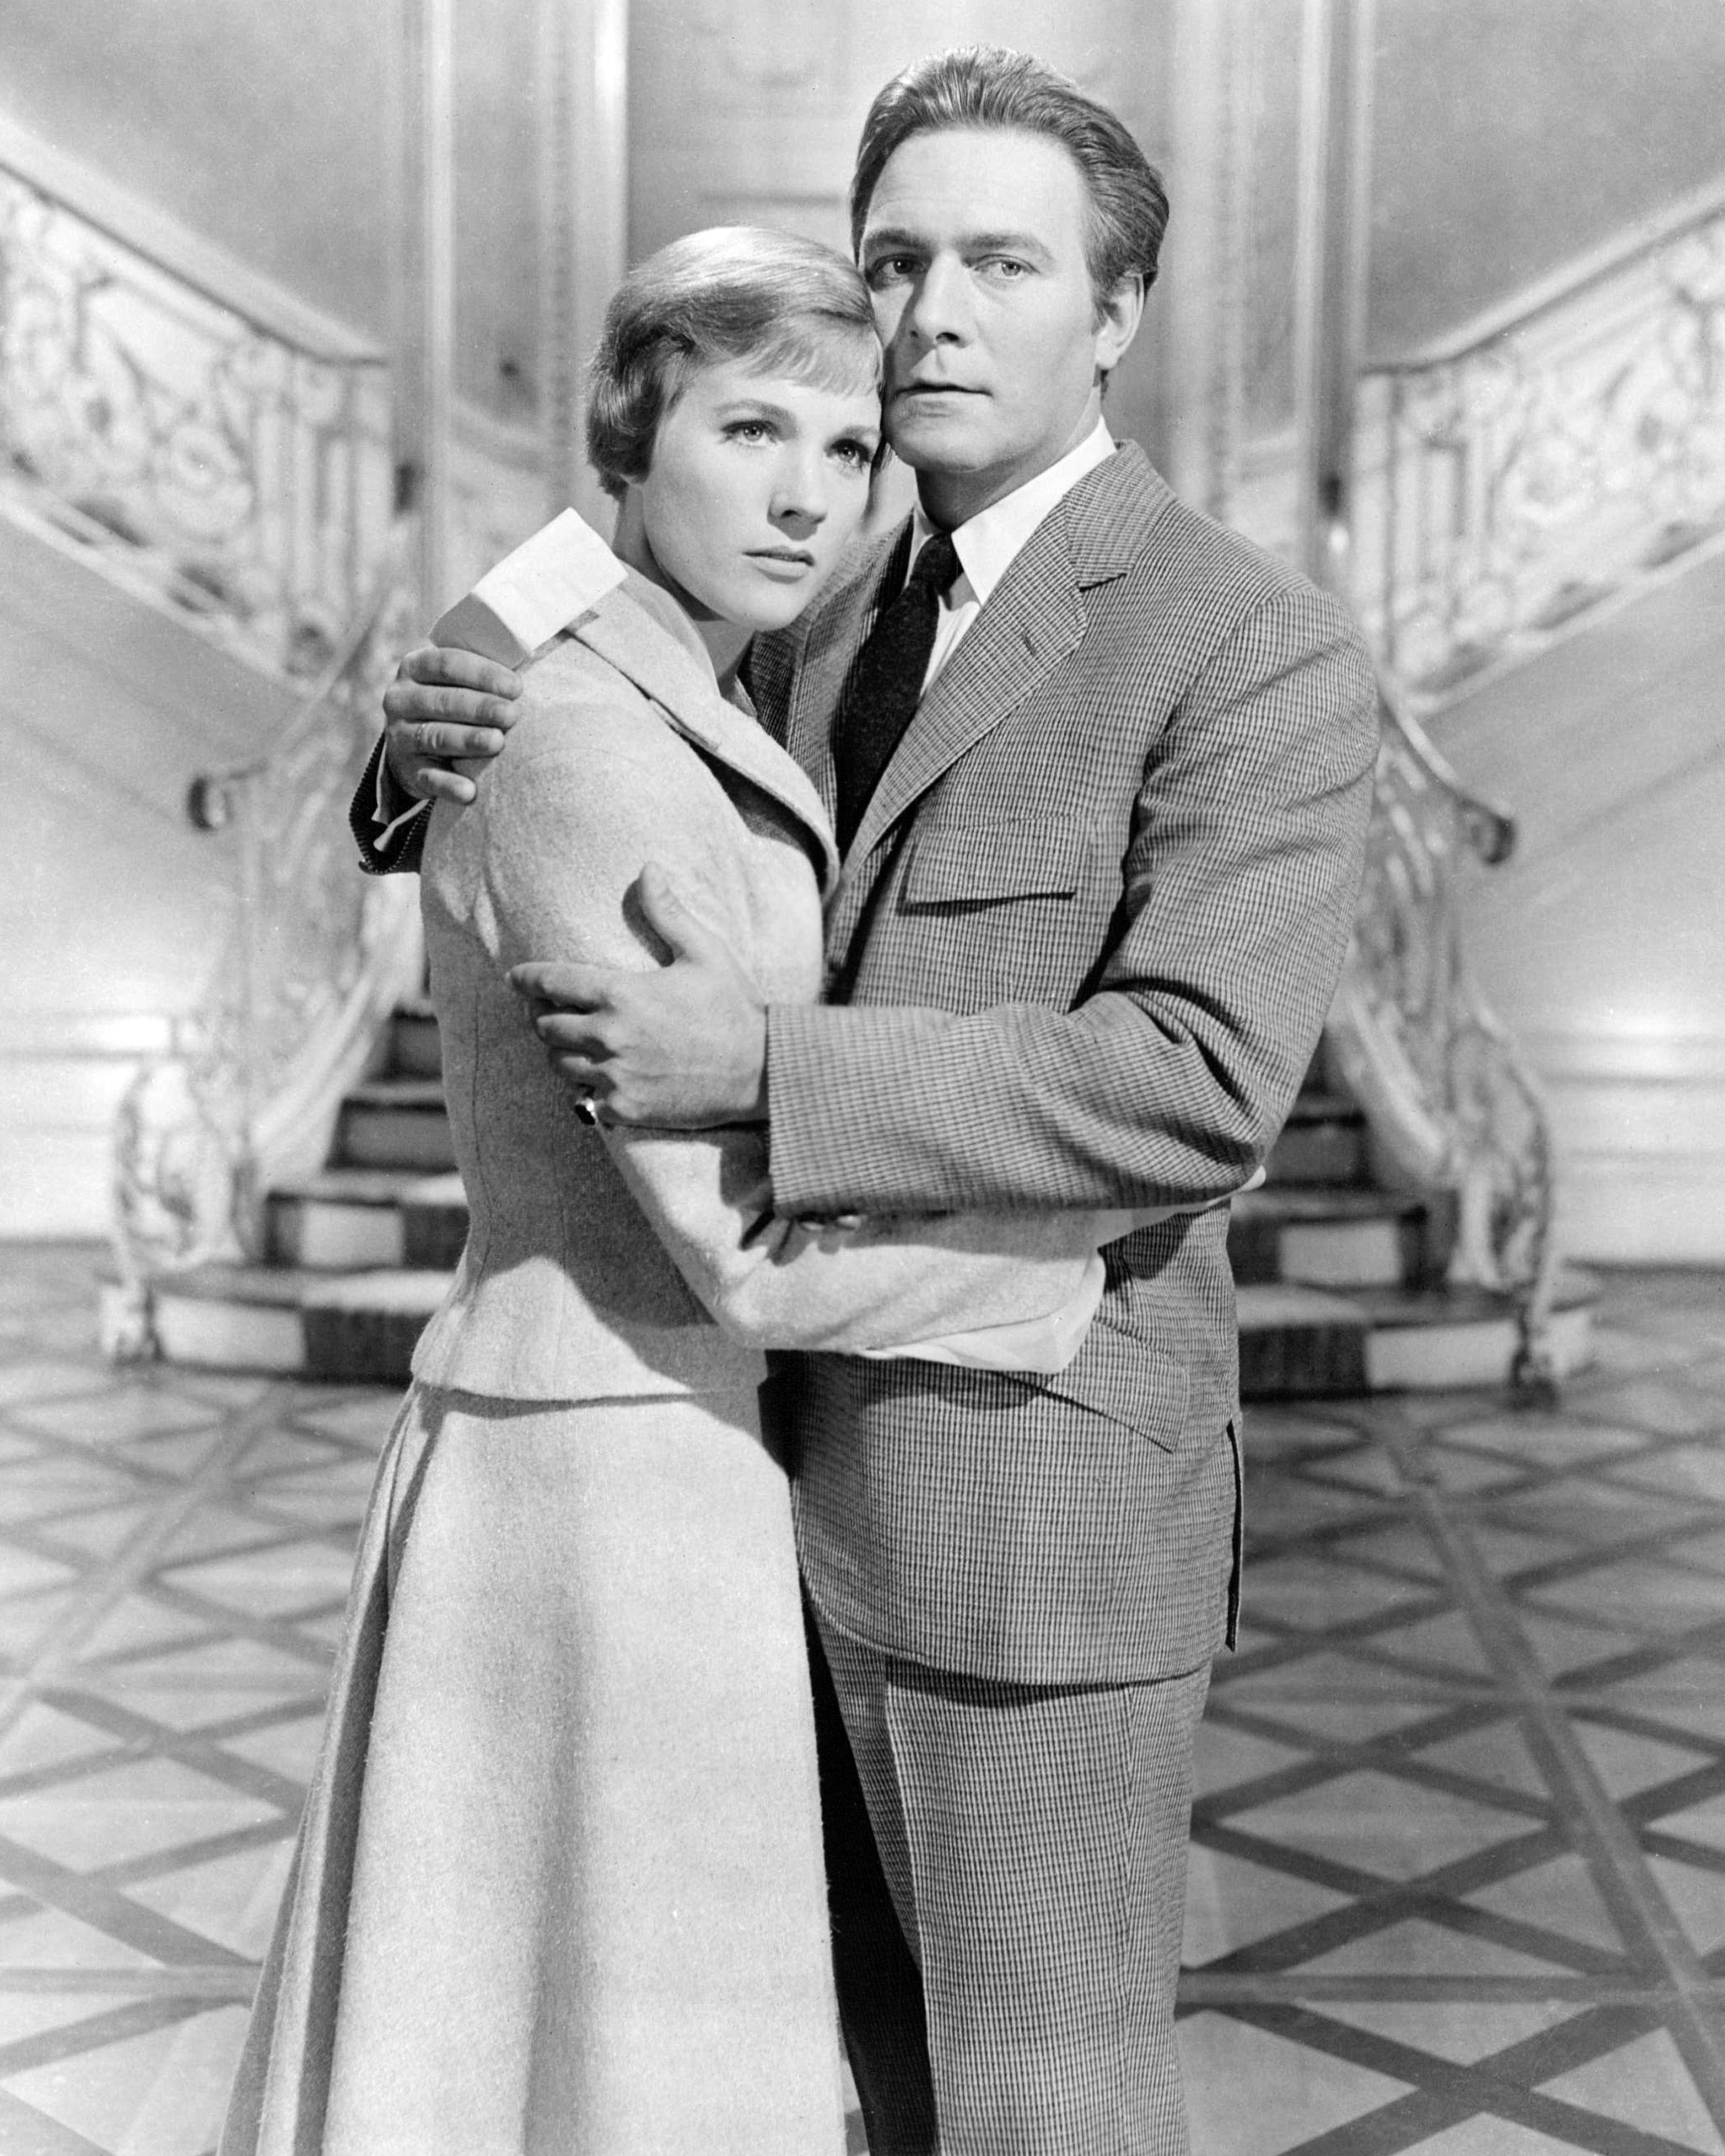 Julie Andrews and Christopher Plummer pose for a promotional portrait for 'The Sound Of Music', directed by Robert Wise, 1965 | Source: Getty Images